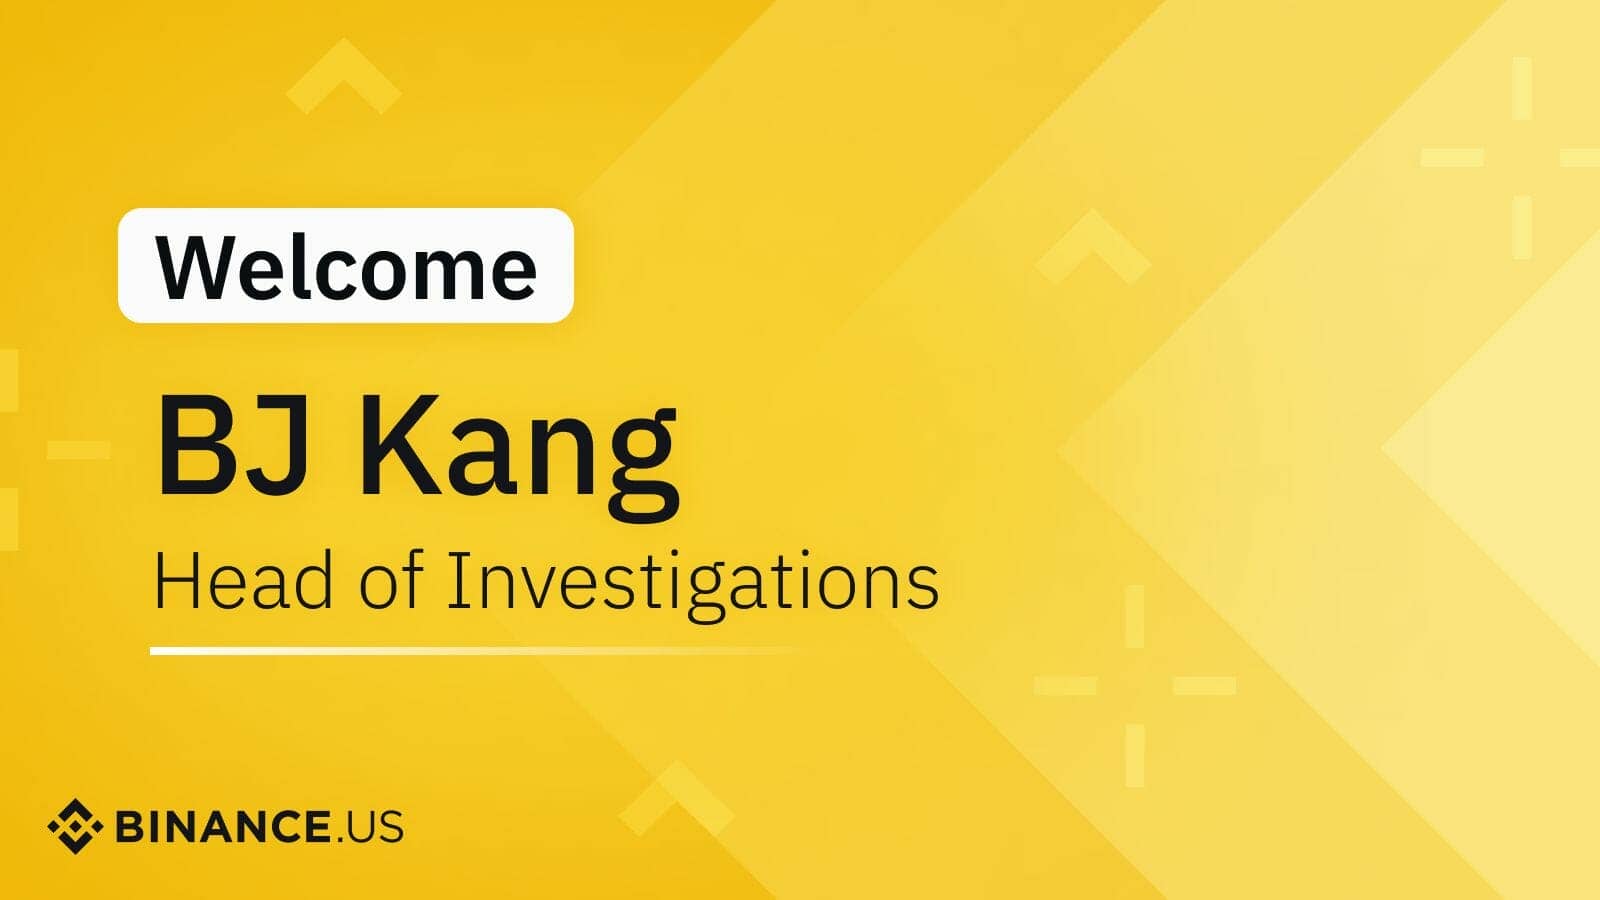 Former Fbi Agent Bj Kang To Serve As Head Of Investigations At Binance.us